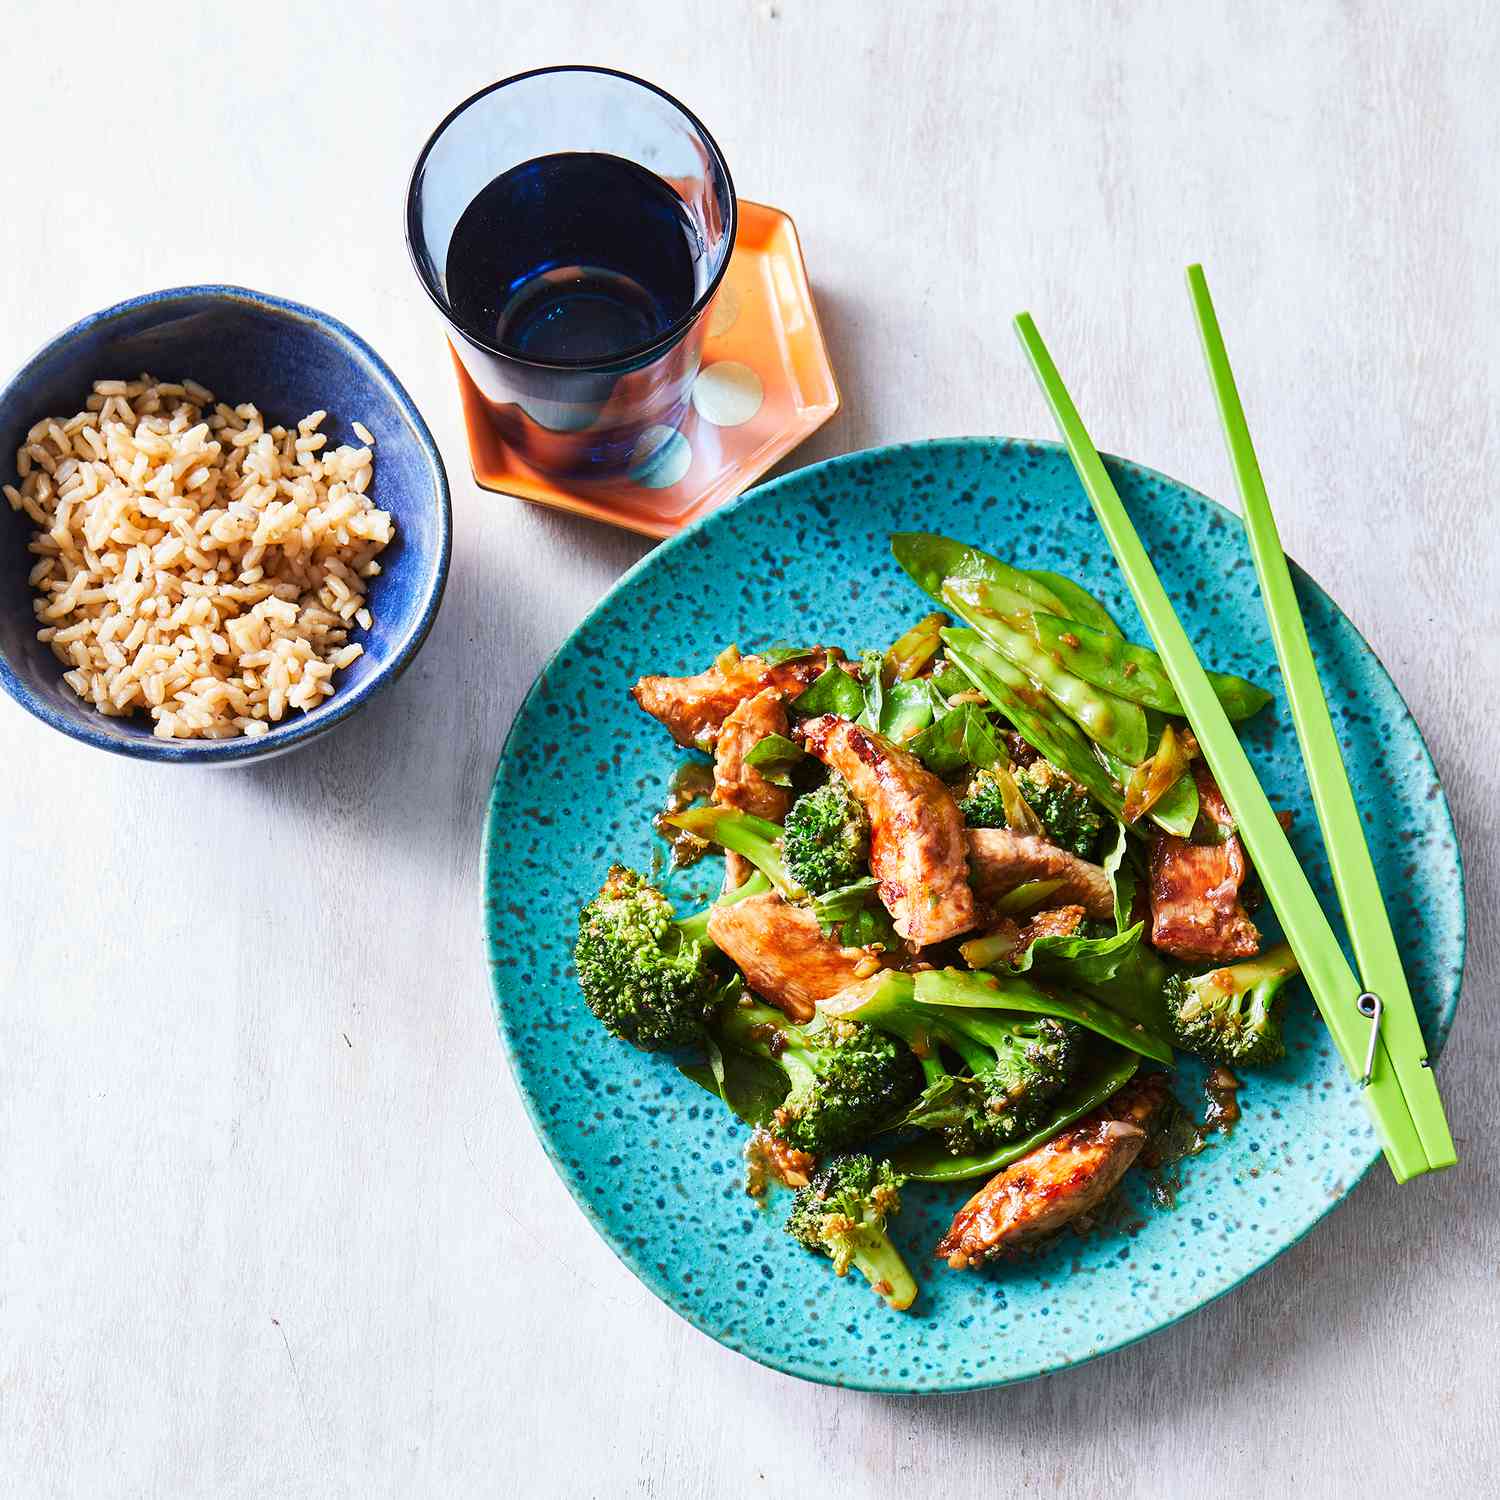 Chicken & Broccoli Stir-Fry with Ginger & Basil